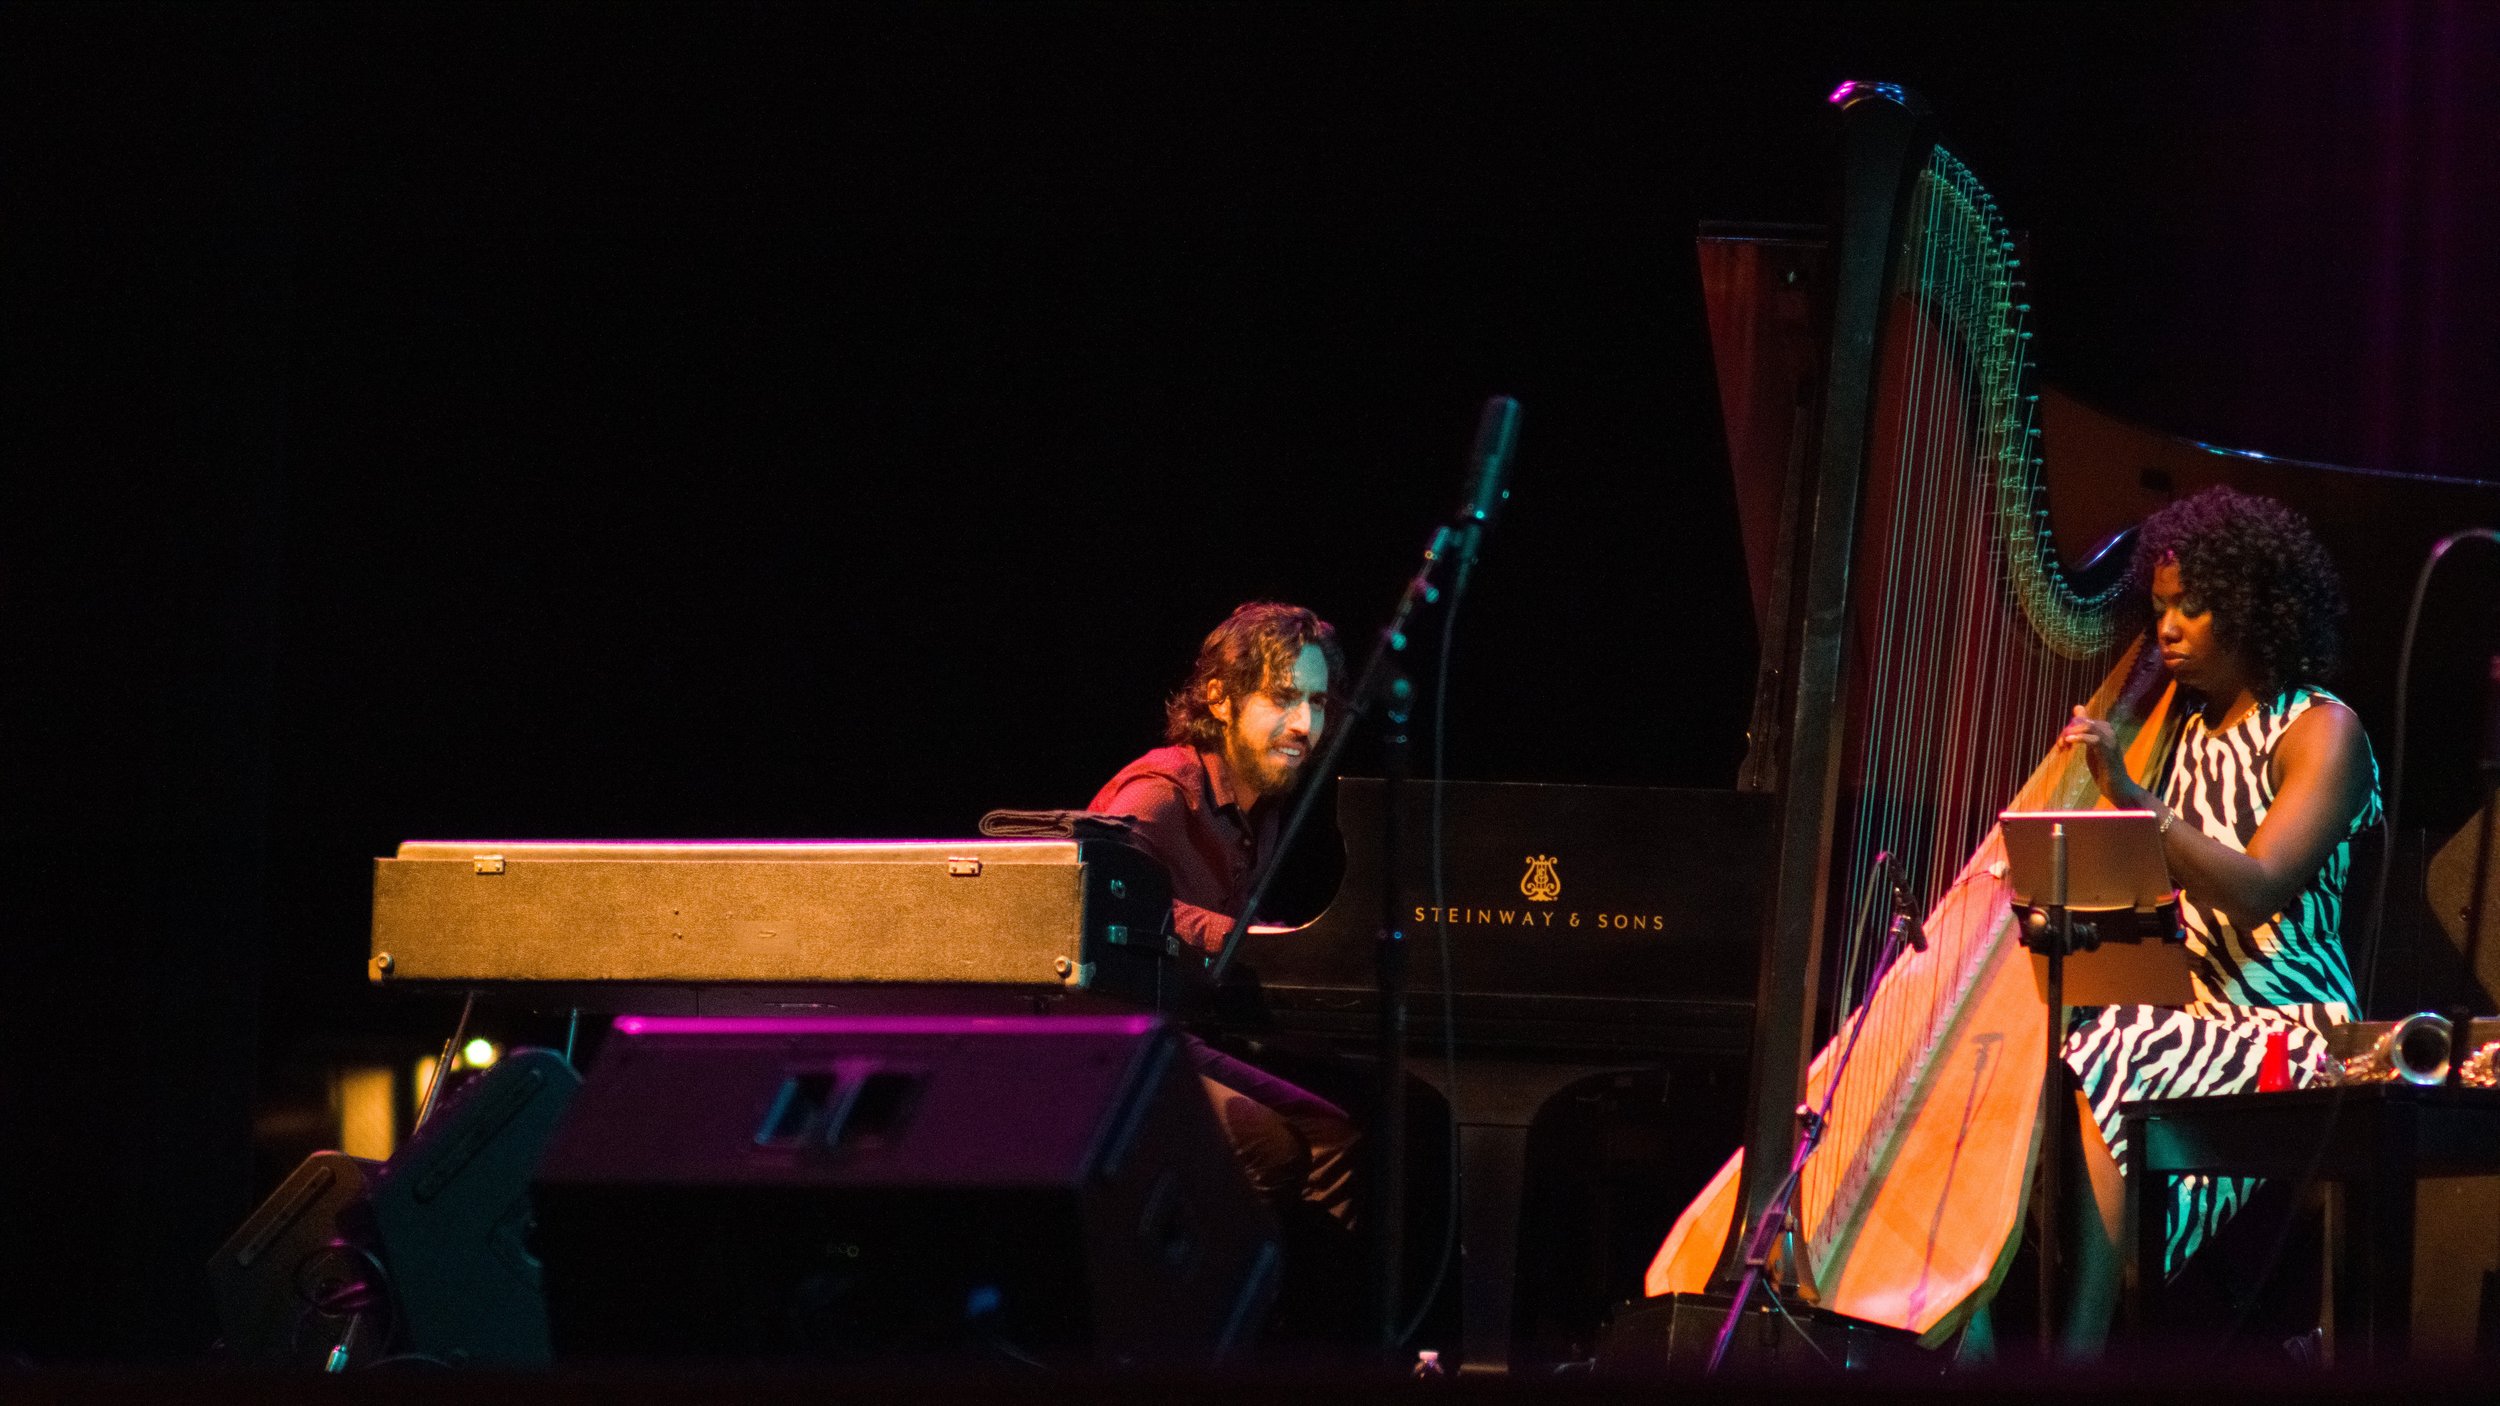  Gadi Lehavi (left) plays piano with Brandee Younger on harp (right) at the Santa Monica College Performing Arts Center, Santa Monica, Calif. as part of Ravi Coltrane's group on Sept. 23 2022. It was the birthday of Ravi Coltrane's late father John C